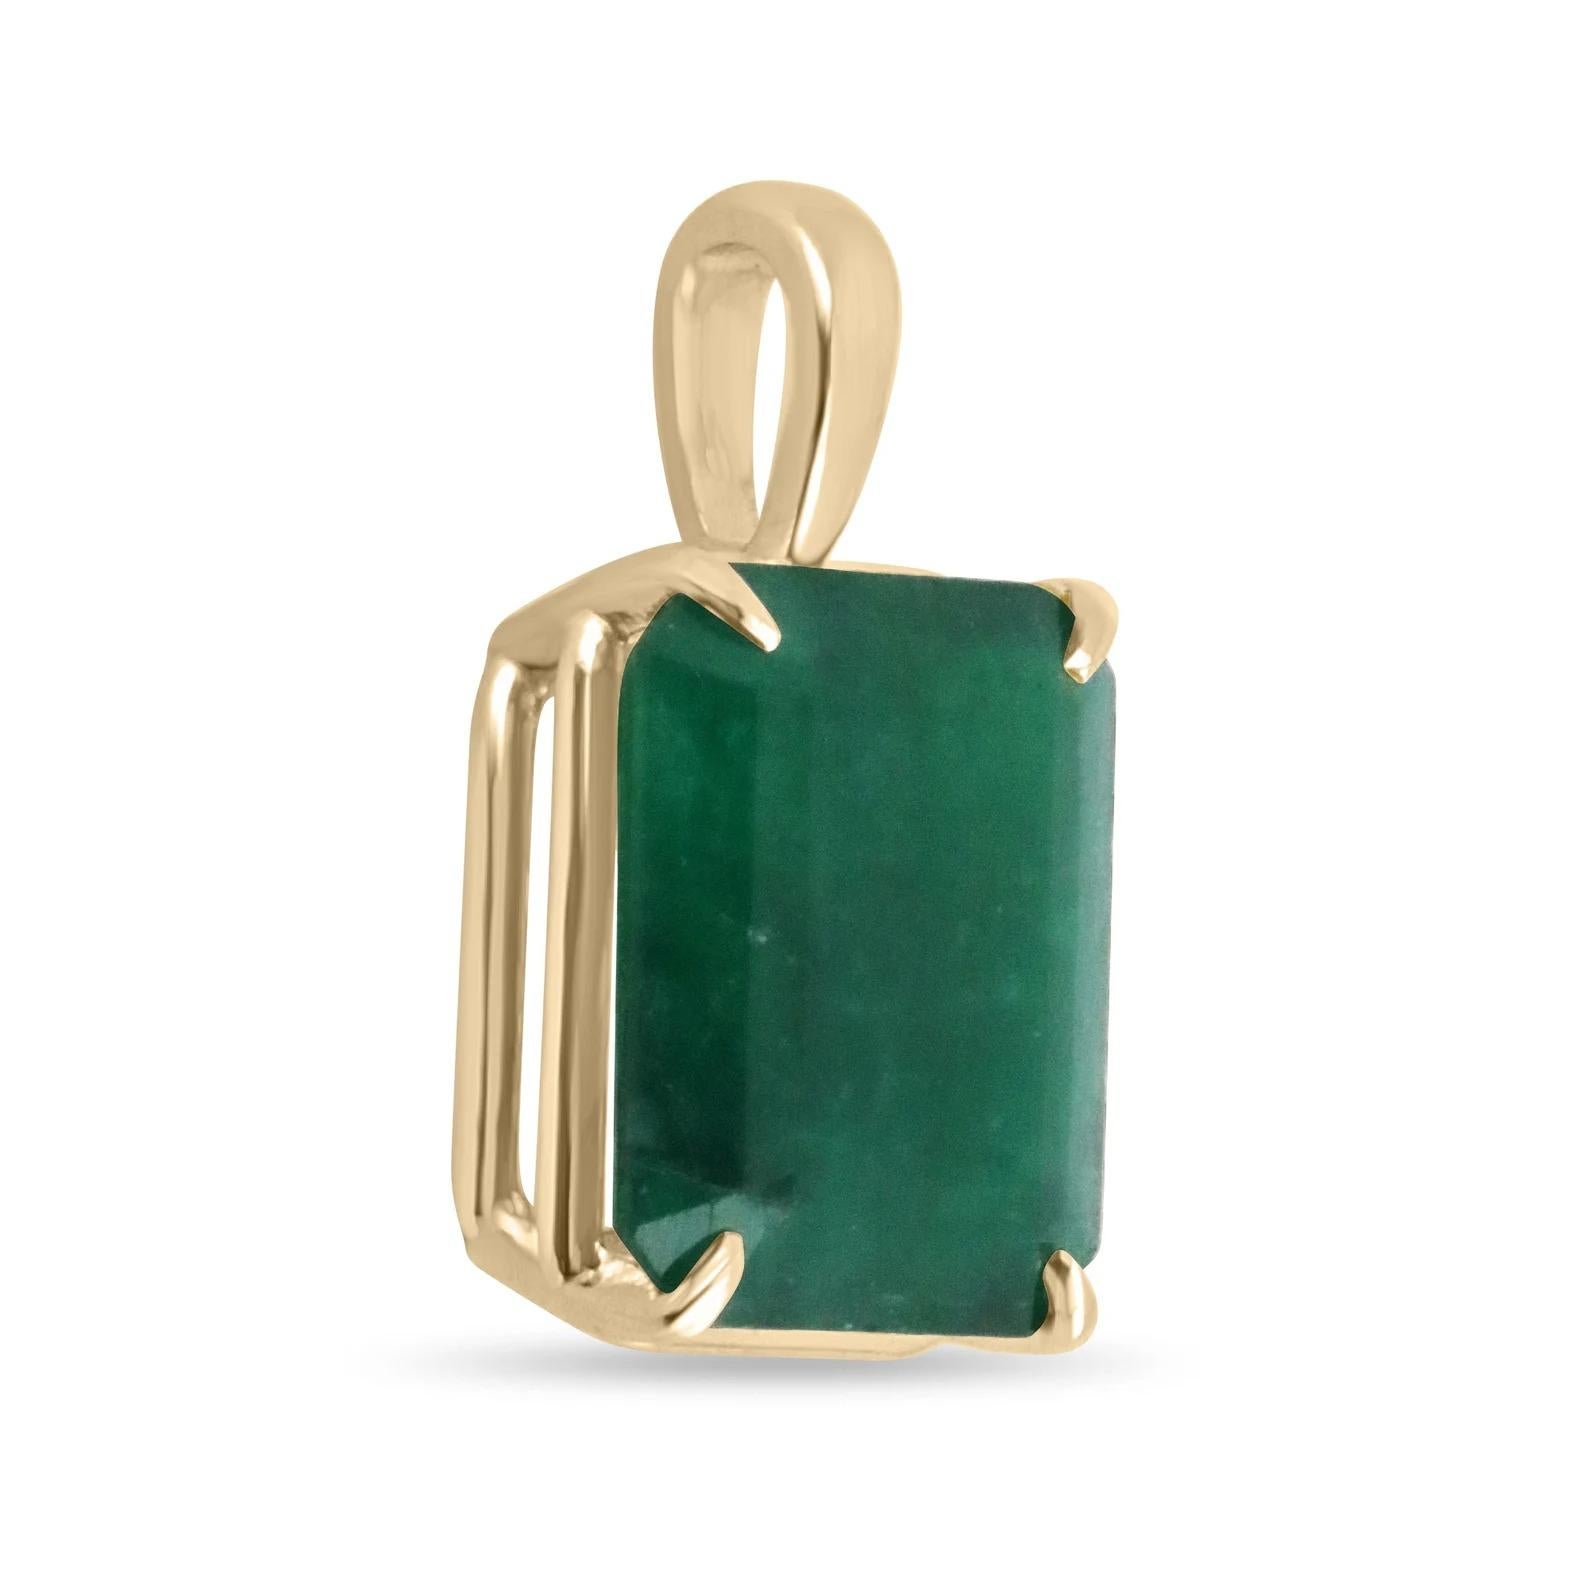 Displayed is a classic super rare huge dark green emerald solitaire necklace set in 14K yellow gold. This gorgeous solitaire pendant carries a large one-of-a-kind 9.80-carat emerald in a four-prong setting. The gem has a dark green color and a very